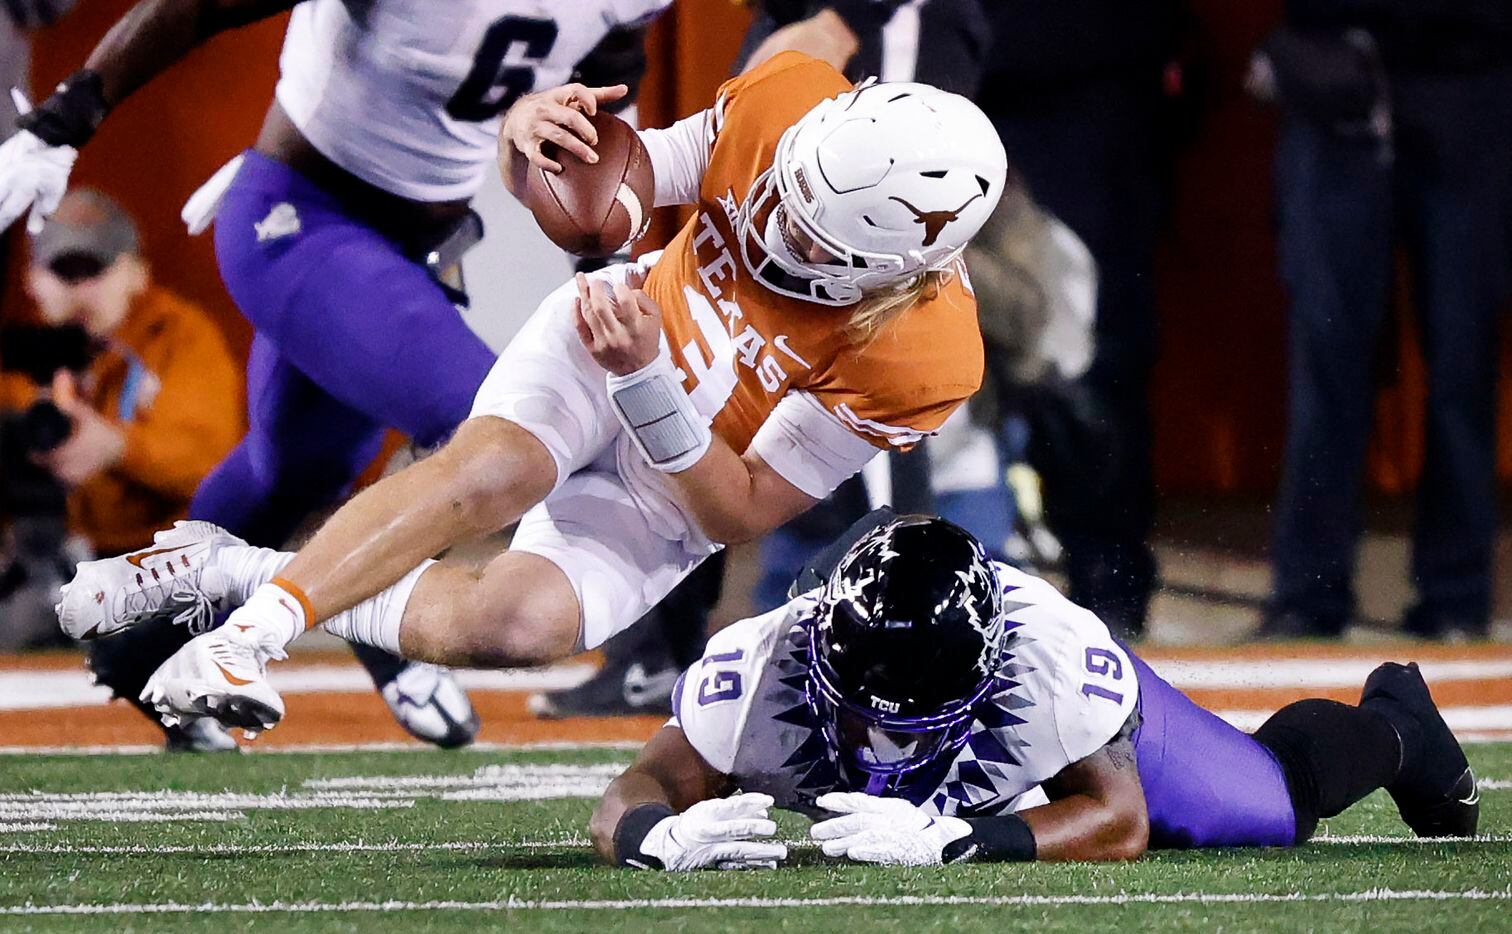 TCU Horned Frogs linebacker Shadrach Banks (19) tried to pounce on Texas Longhorns...